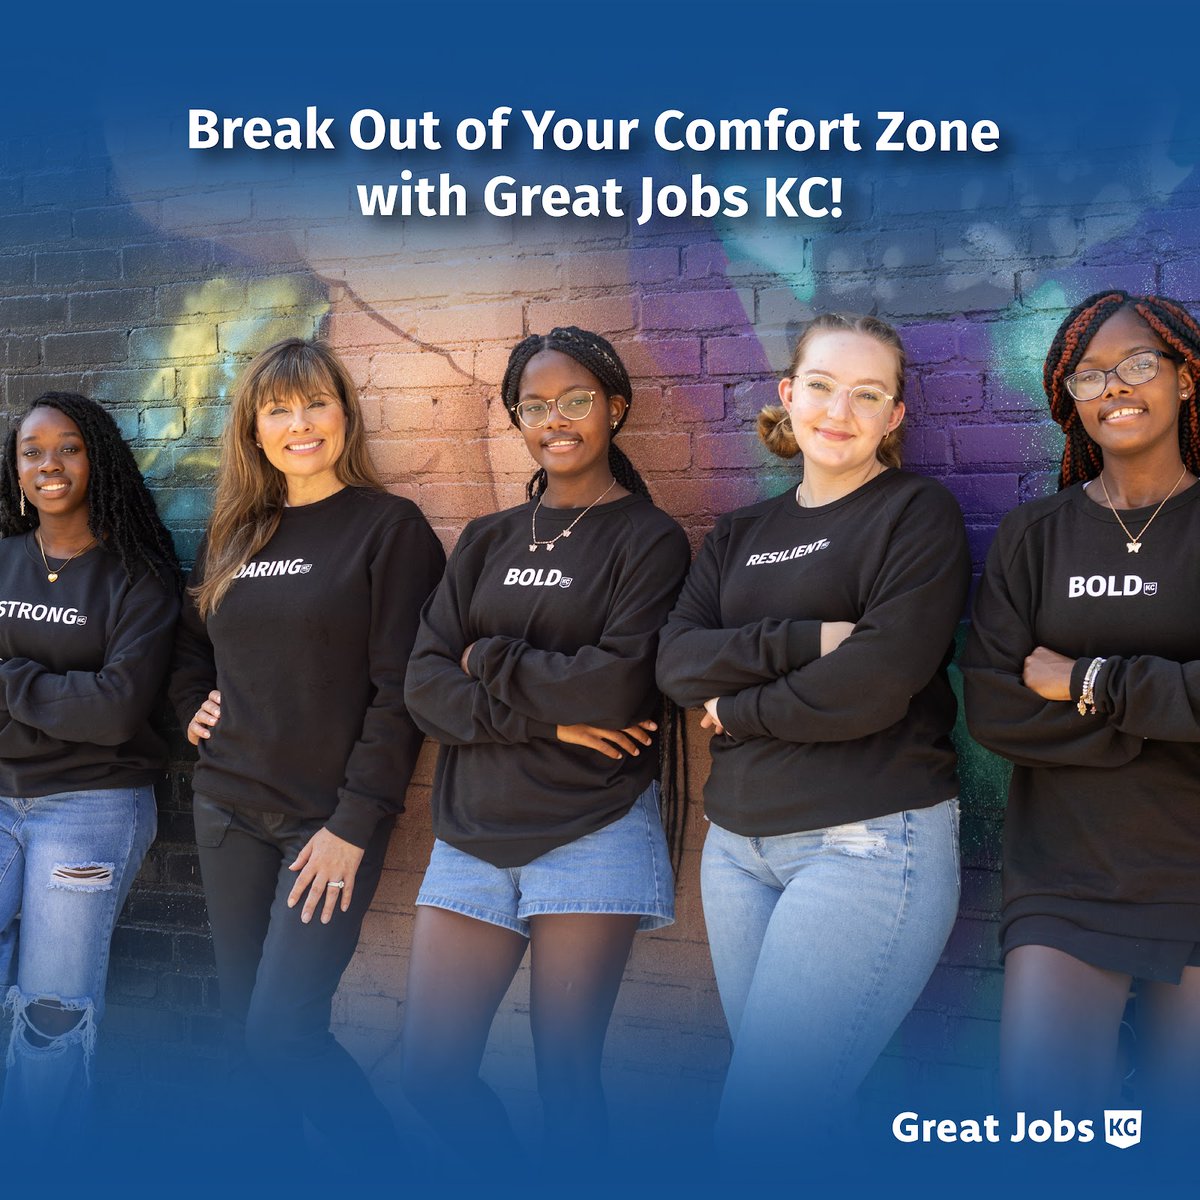 Happy National Take a Chance Day! Today is your reminder to take a chance with Great Jobs KC!